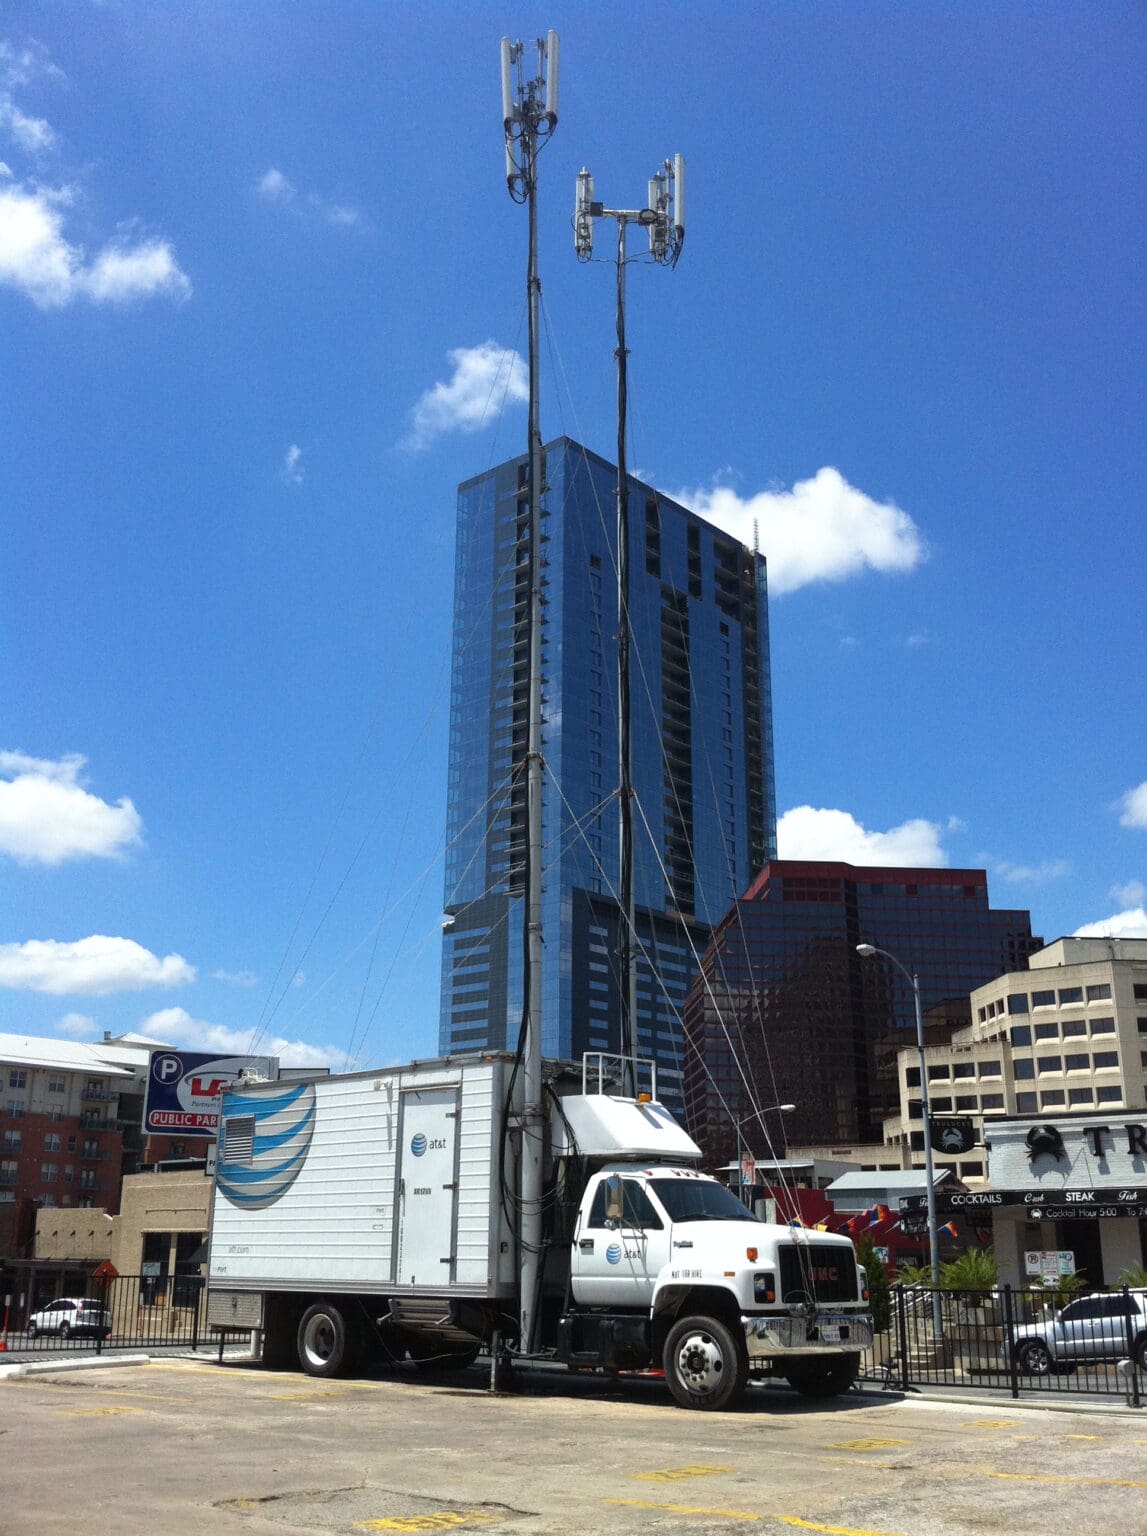 AT&T cell tower on wheels 